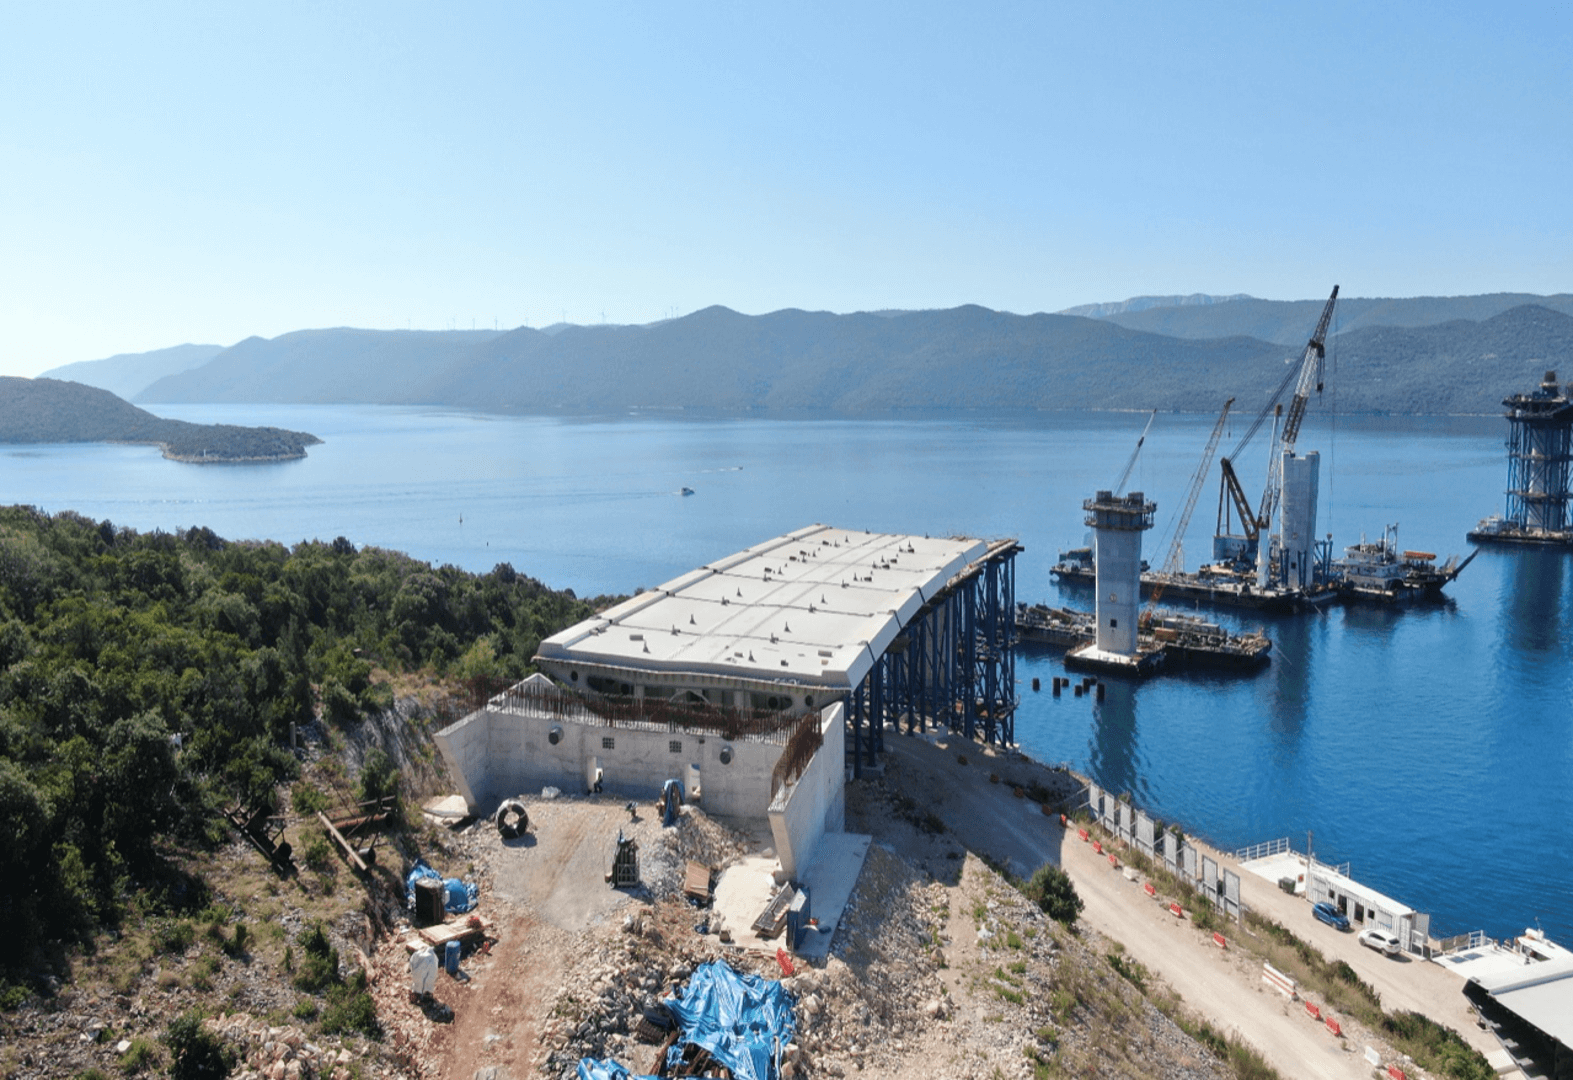 Peljesac bridge expected to be finished in November 2021